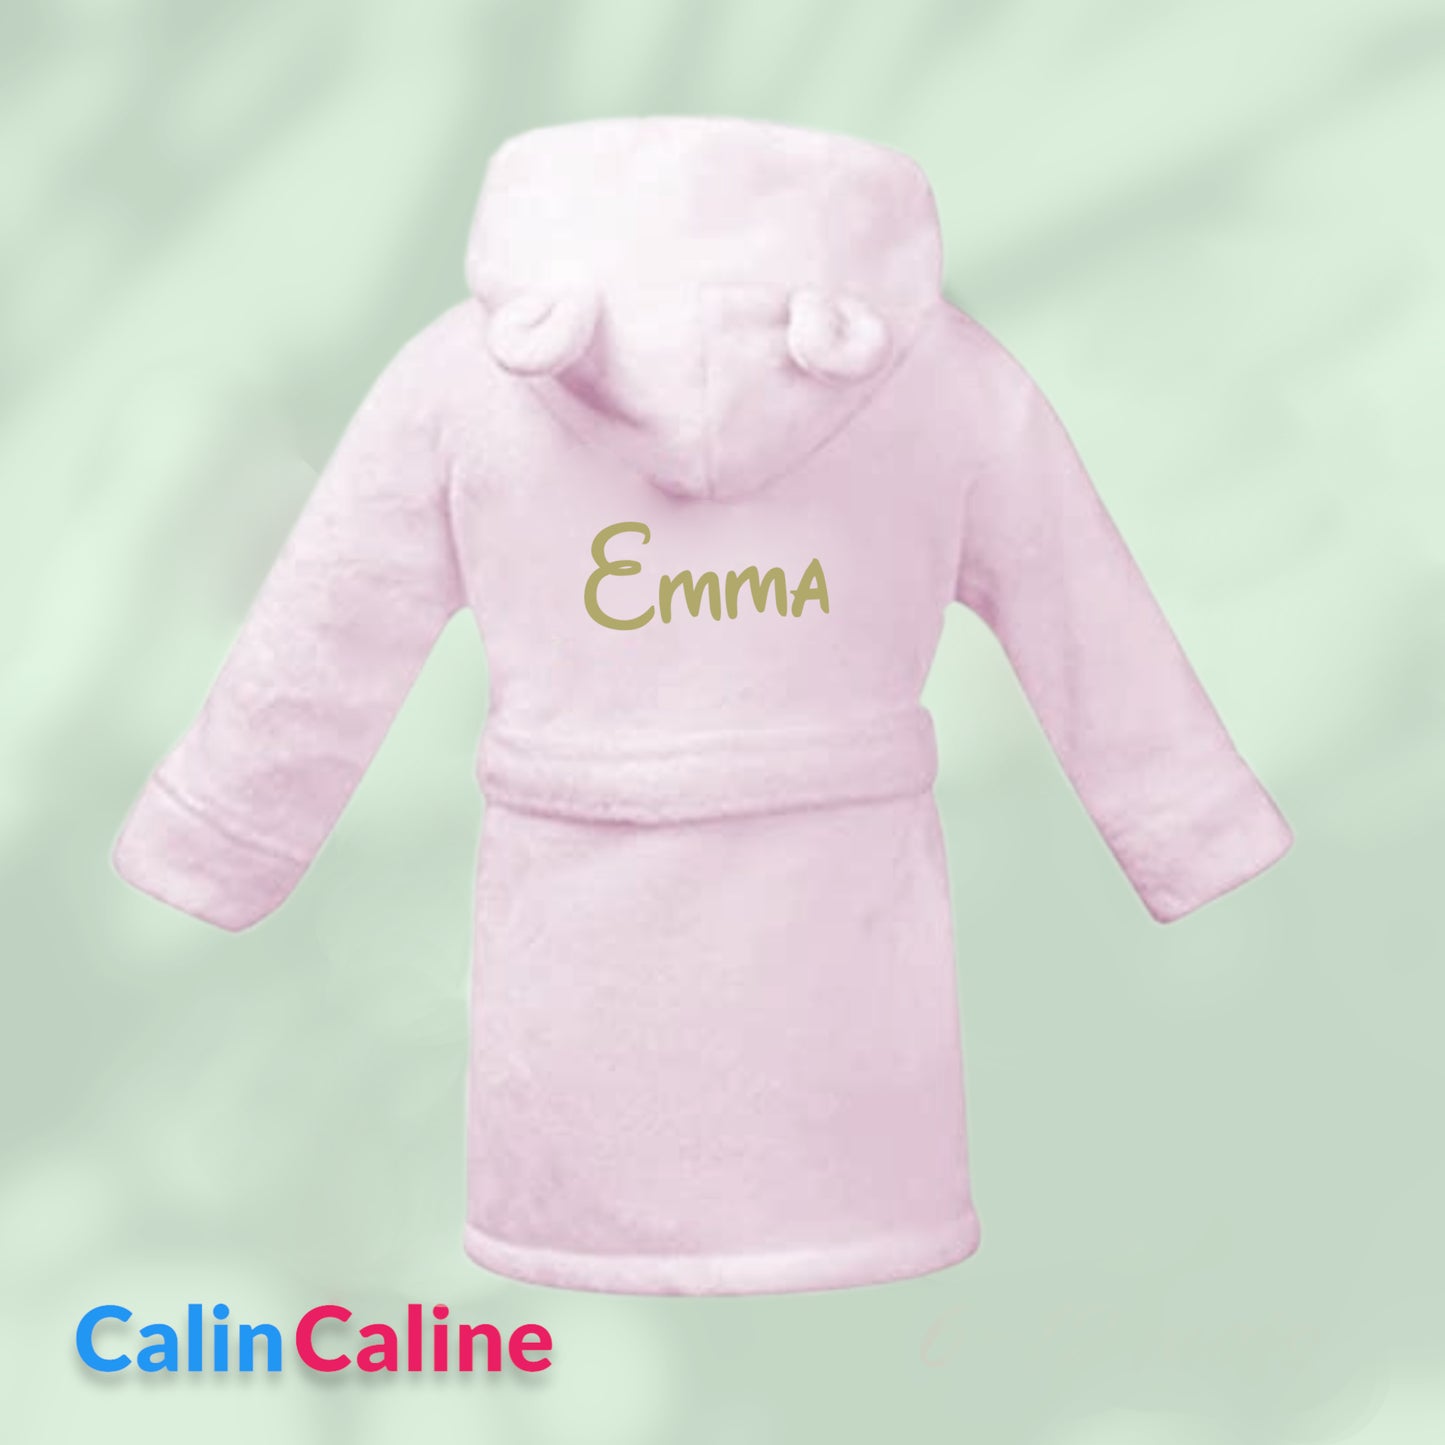 Children's bathrobe | Pink | Personalized with first name | 3 sizes